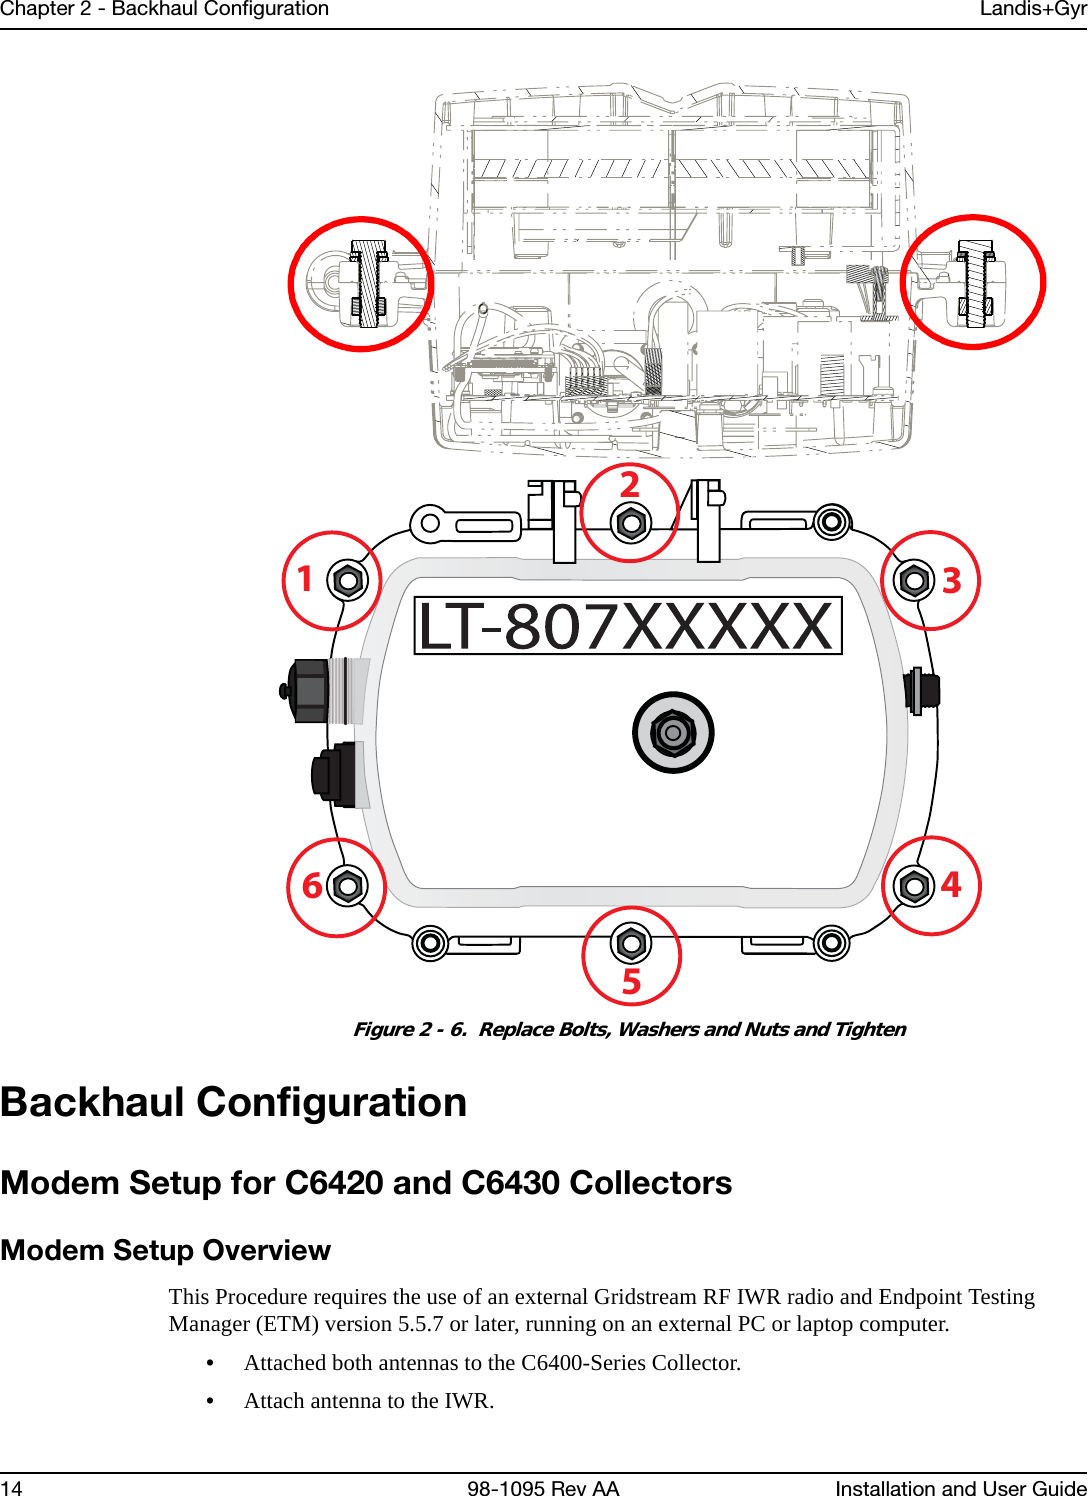 Chapter 2 - Backhaul Configuration Landis+Gyr14 98-1095 Rev AA Installation and User GuideFigure 2 - 6.  Replace Bolts, Washers and Nuts and TightenBackhaul ConfigurationModem Setup for C6420 and C6430 CollectorsModem Setup OverviewThis Procedure requires the use of an external Gridstream RF IWR radio and Endpoint Testing Manager (ETM) version 5.5.7 or later, running on an external PC or laptop computer.•Attached both antennas to the C6400-Series Collector.•Attach antenna to the IWR.123456